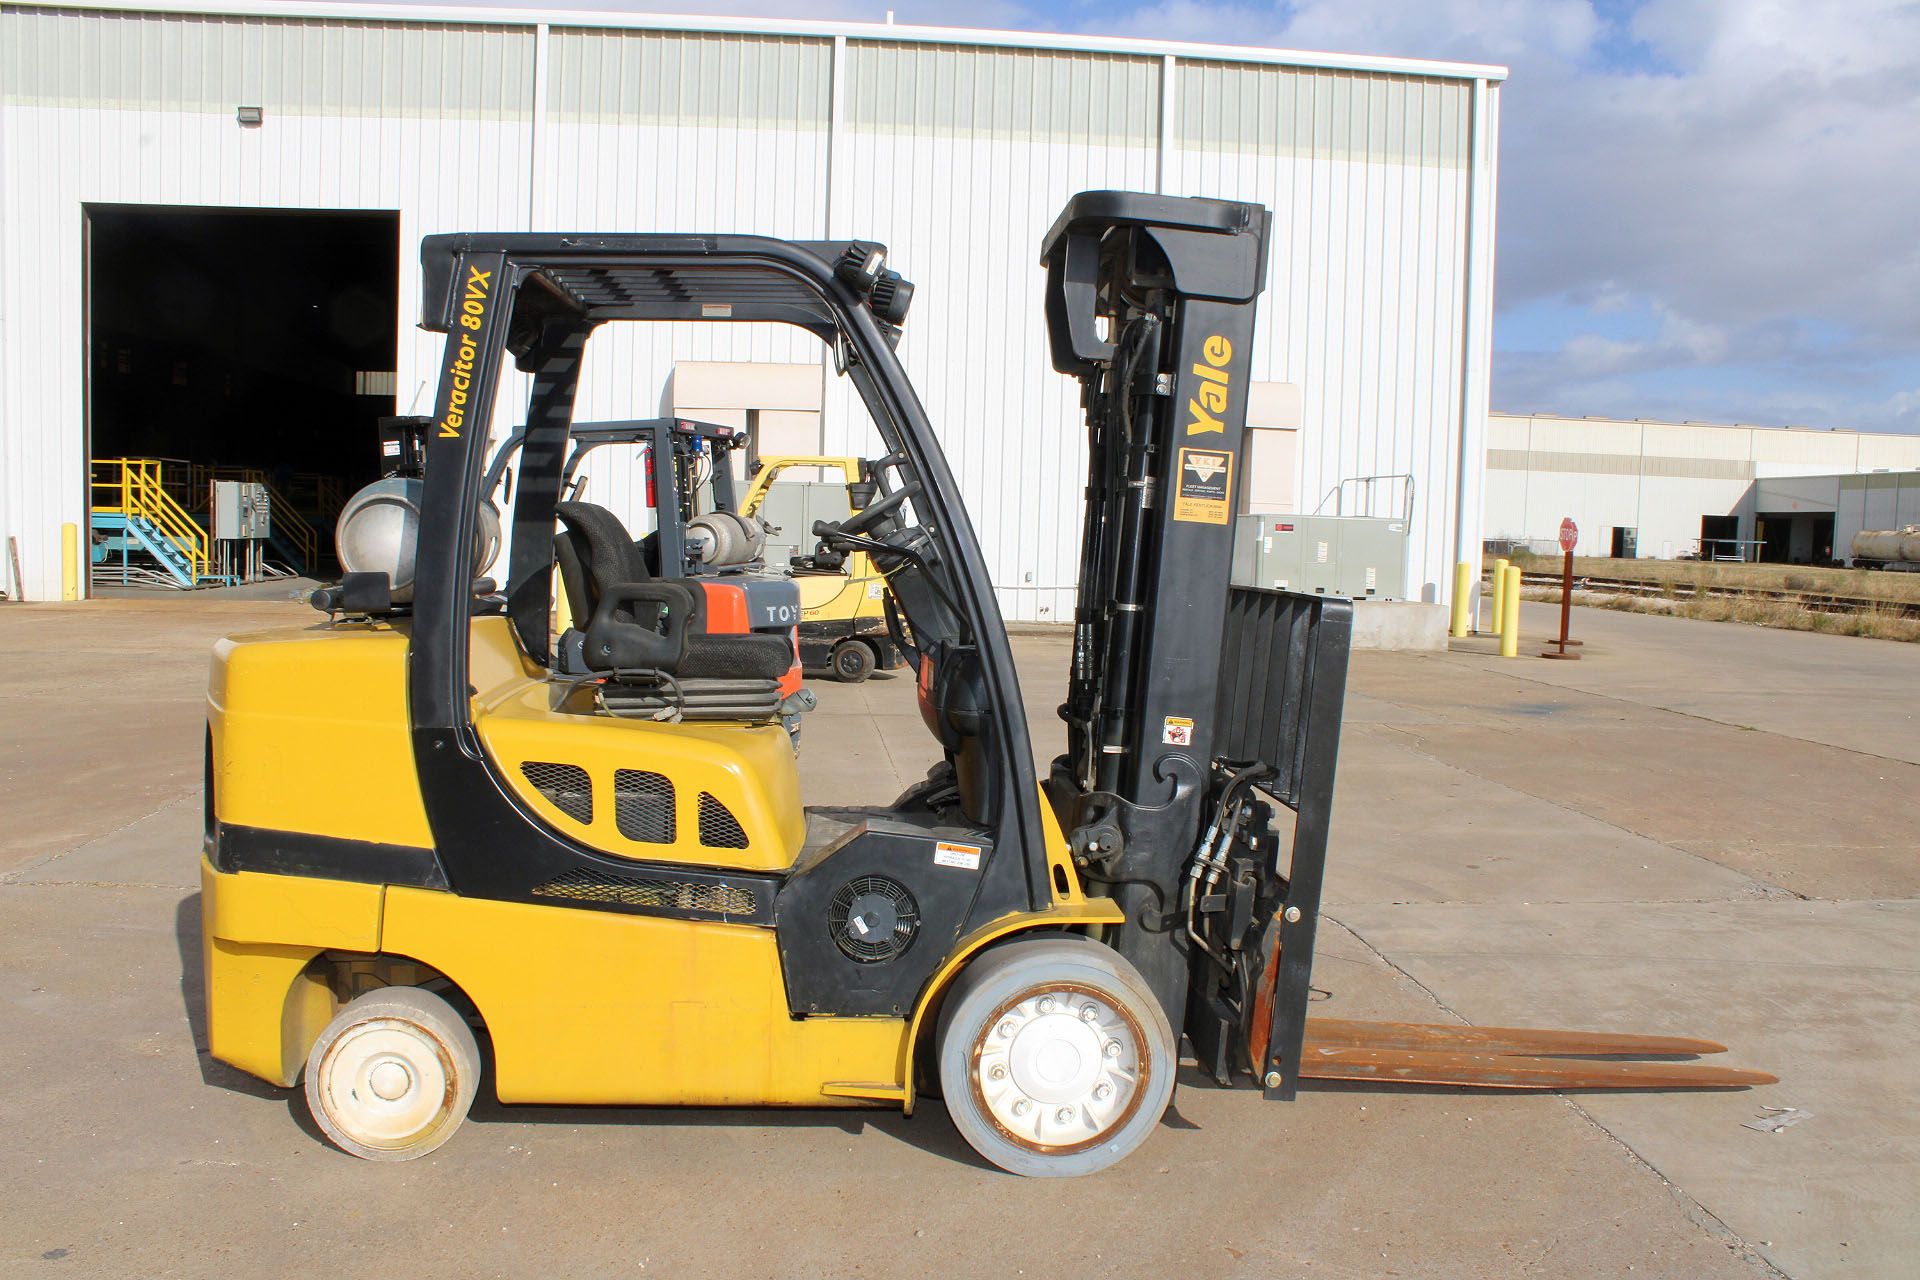 FORKLIFT, YALE 8,000 LB. BASE CAP. MDL. GLC080, new 2016, LPG, 200" max. lift ht., 94" 3-stage mast, - Image 2 of 11